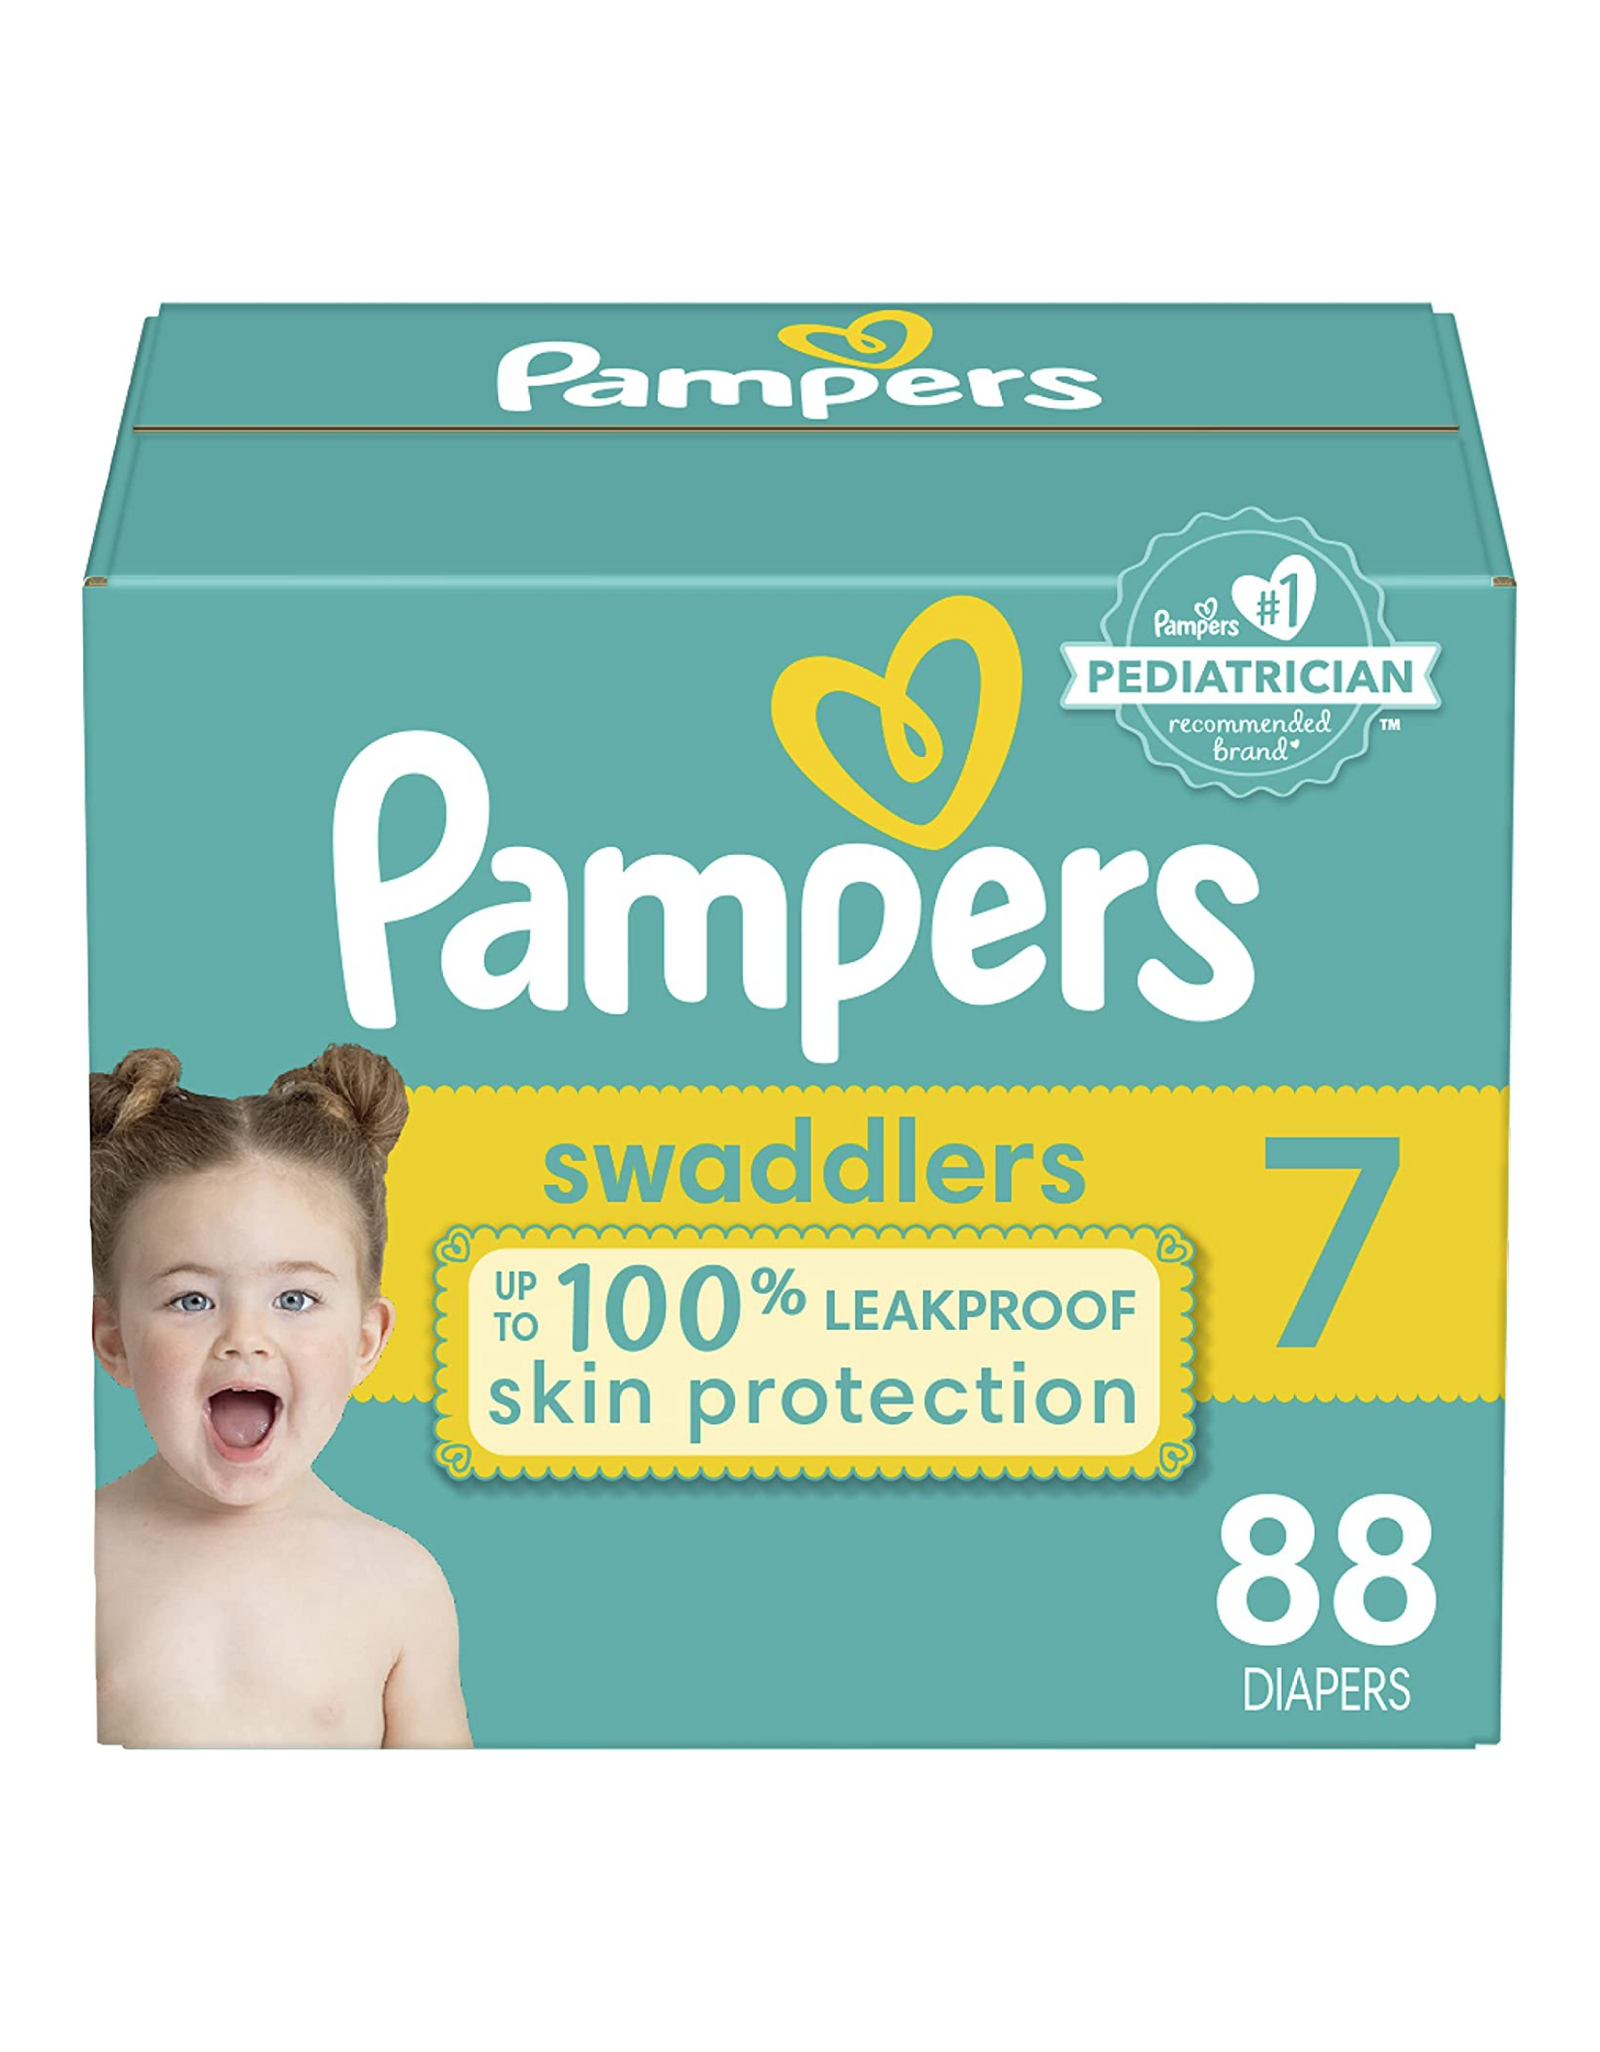 Diapers Size 7, 88 Count - Pampers Swaddlers Baby Diapers, One Month Supply (Packaging May Vary)